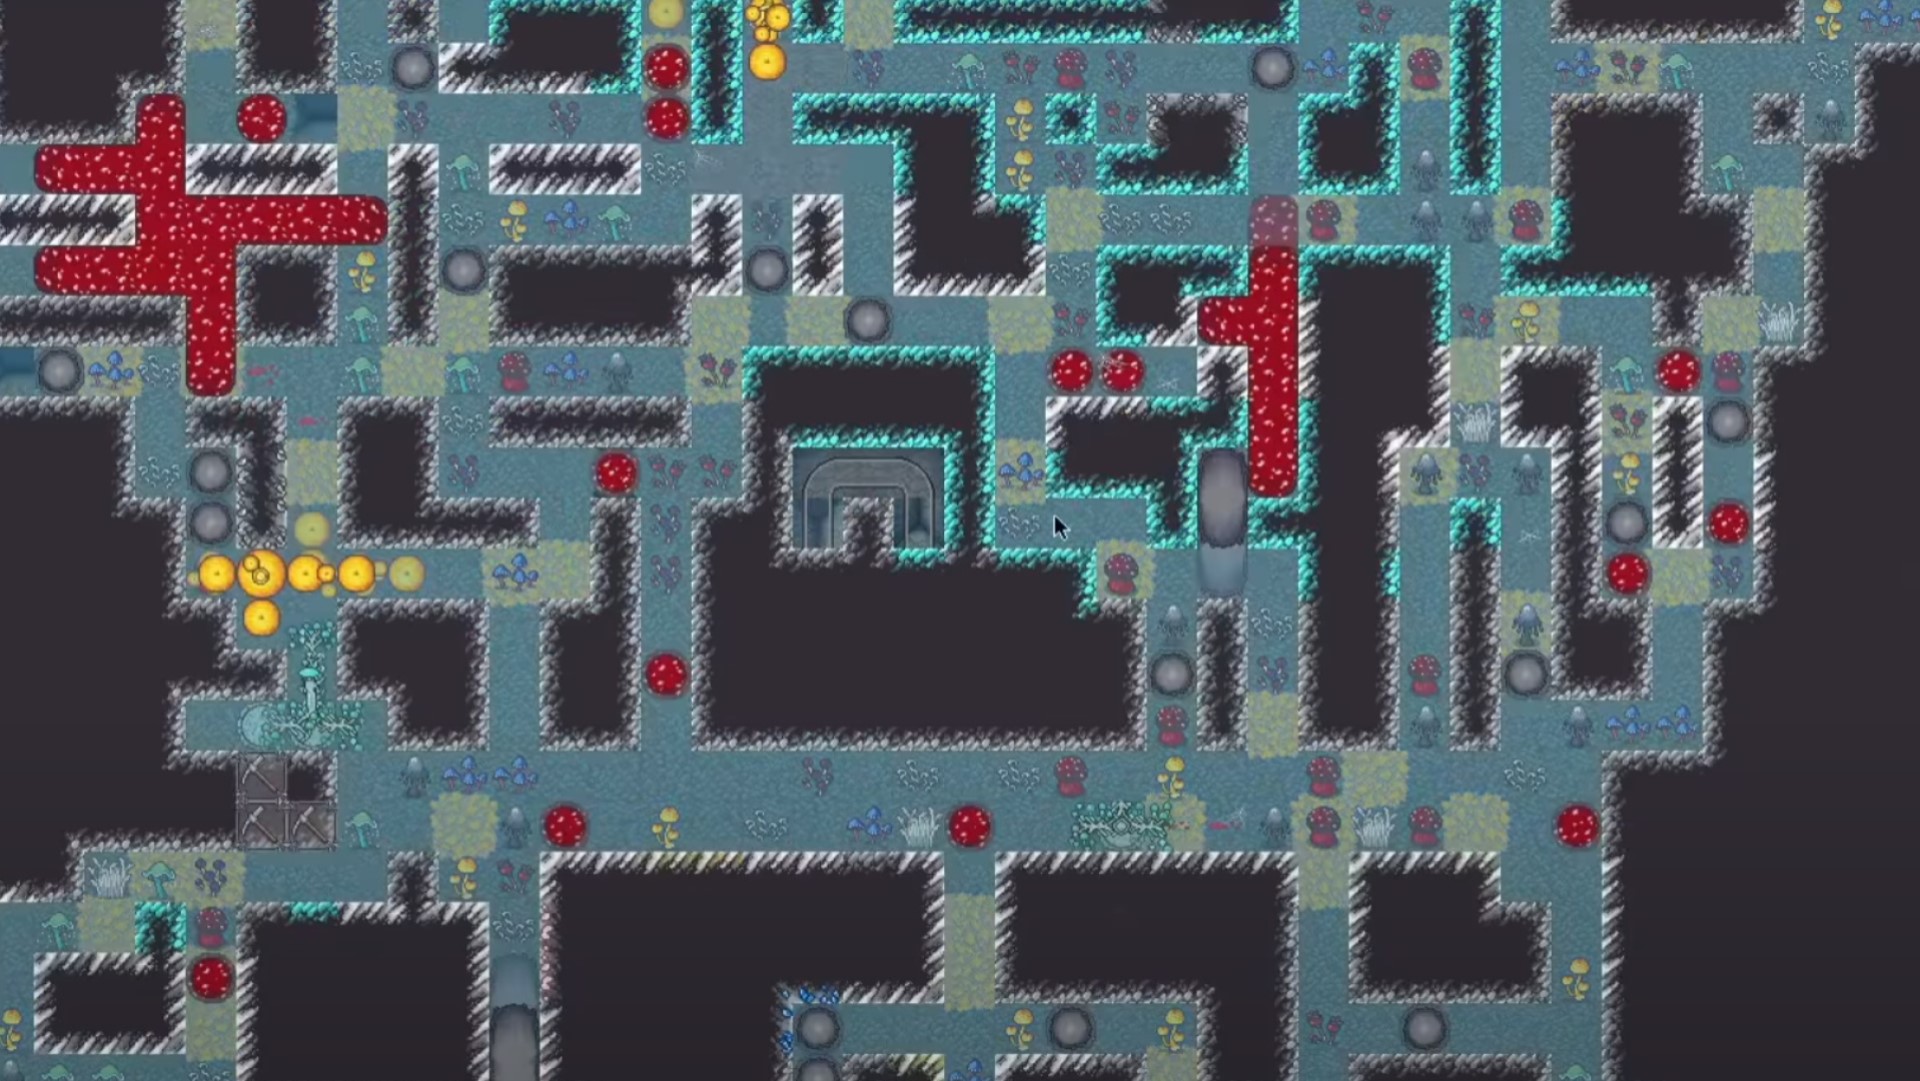 Dwarf Fortress gameplay video shows a trip down the garbage chute